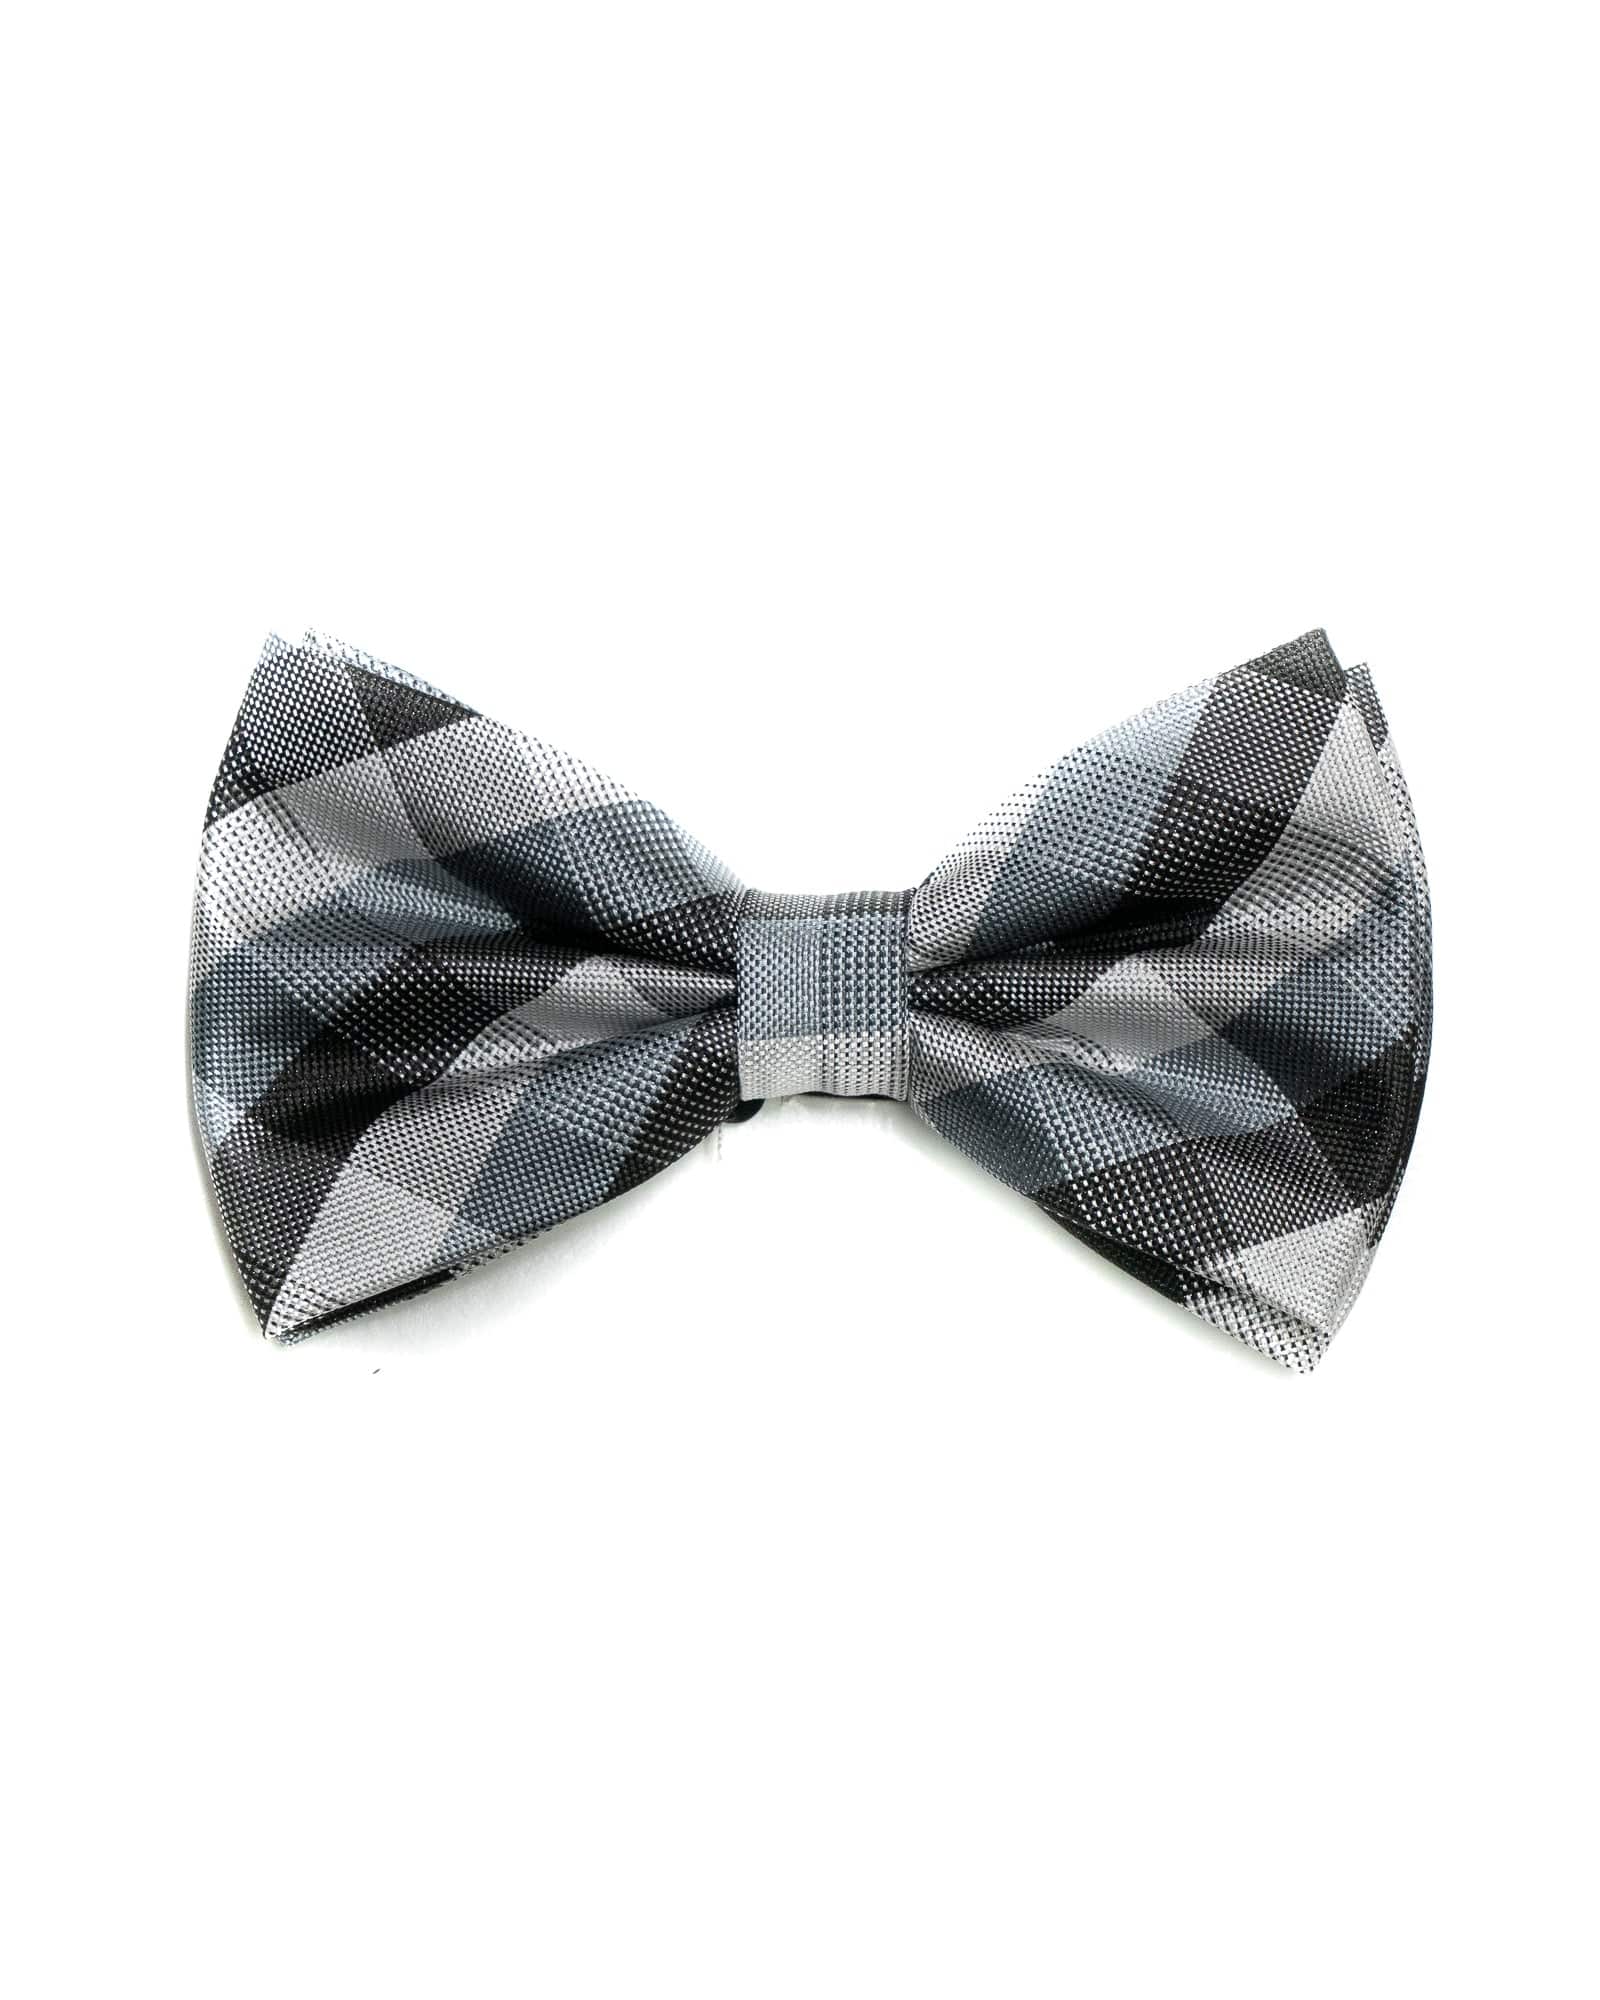 Bow Tie In Plaid Pattern Grey & Black - Rainwater's Men's Clothing and Tuxedo Rental